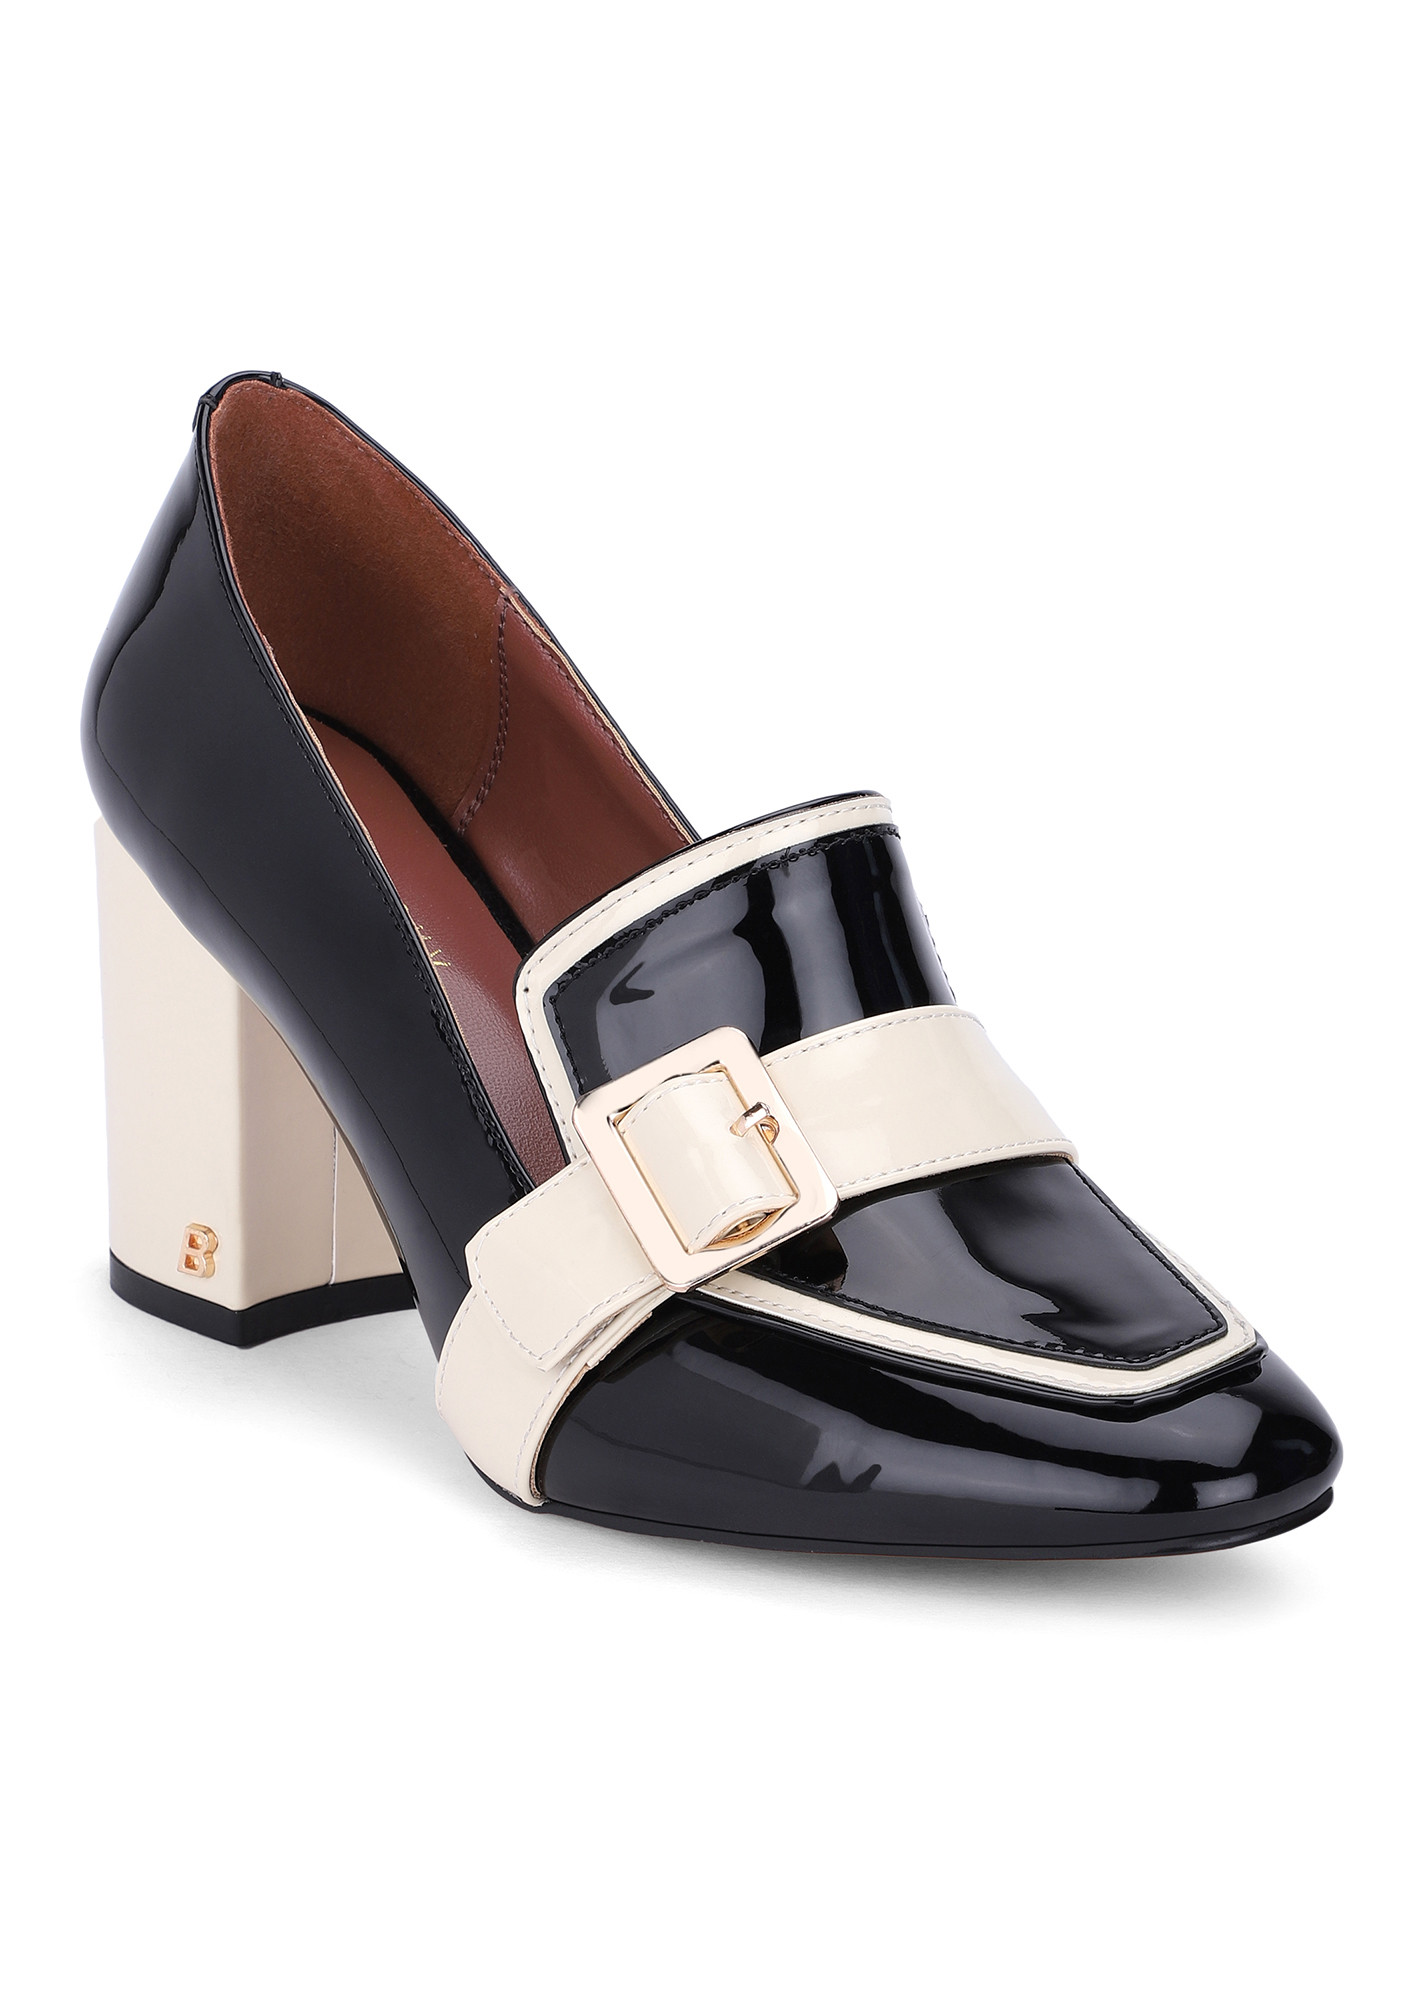 THE BOSS LADY BLACK BEIGE HEELED LOAFERS